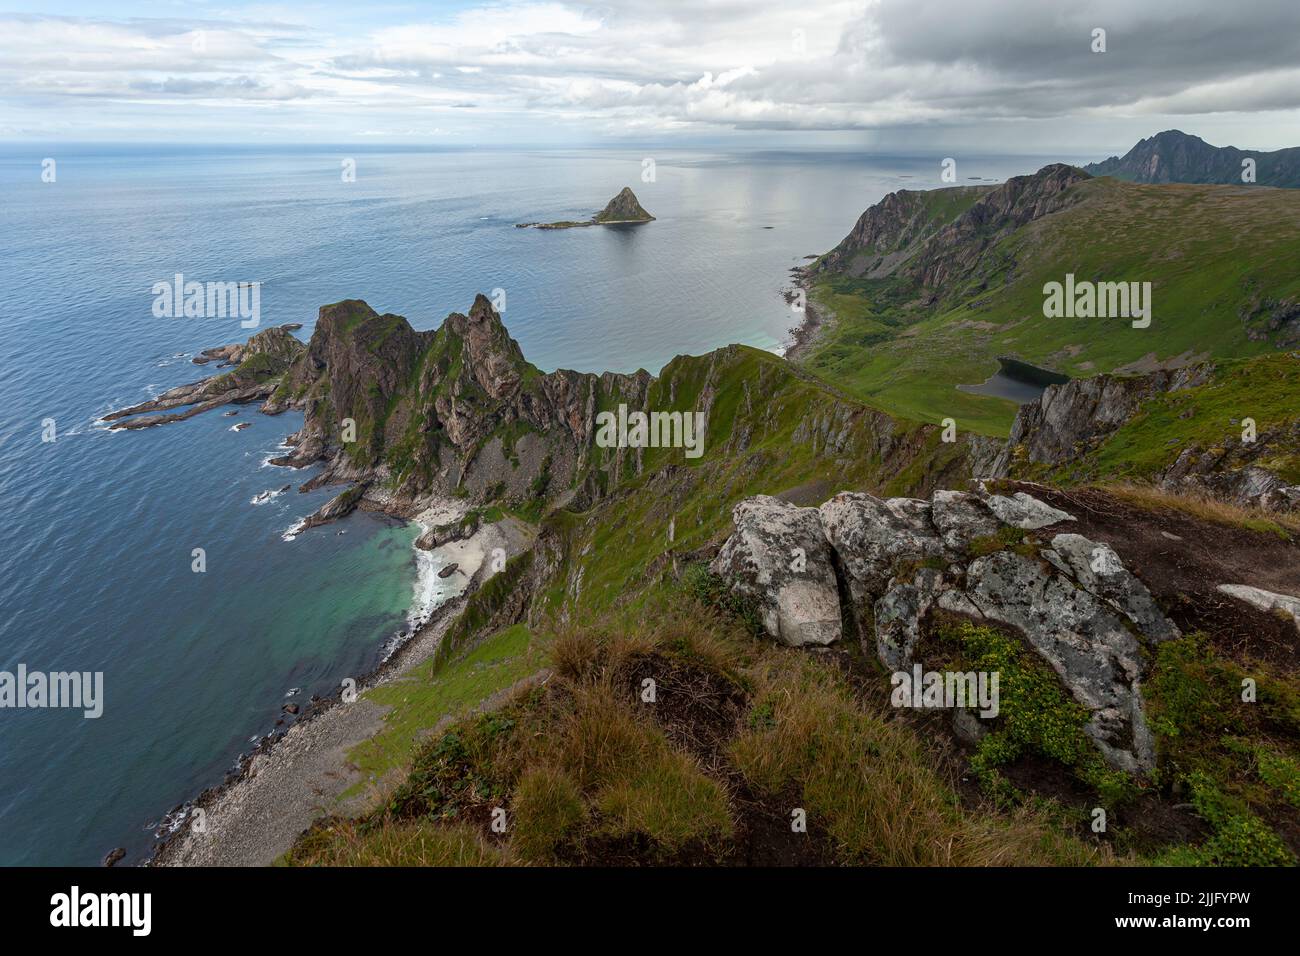 Måtind lookout at a rocky seascape bellow it. View from a mountain top next to the Norway sea with steep cliffs, white sandy beach and a greenery. Stock Photo